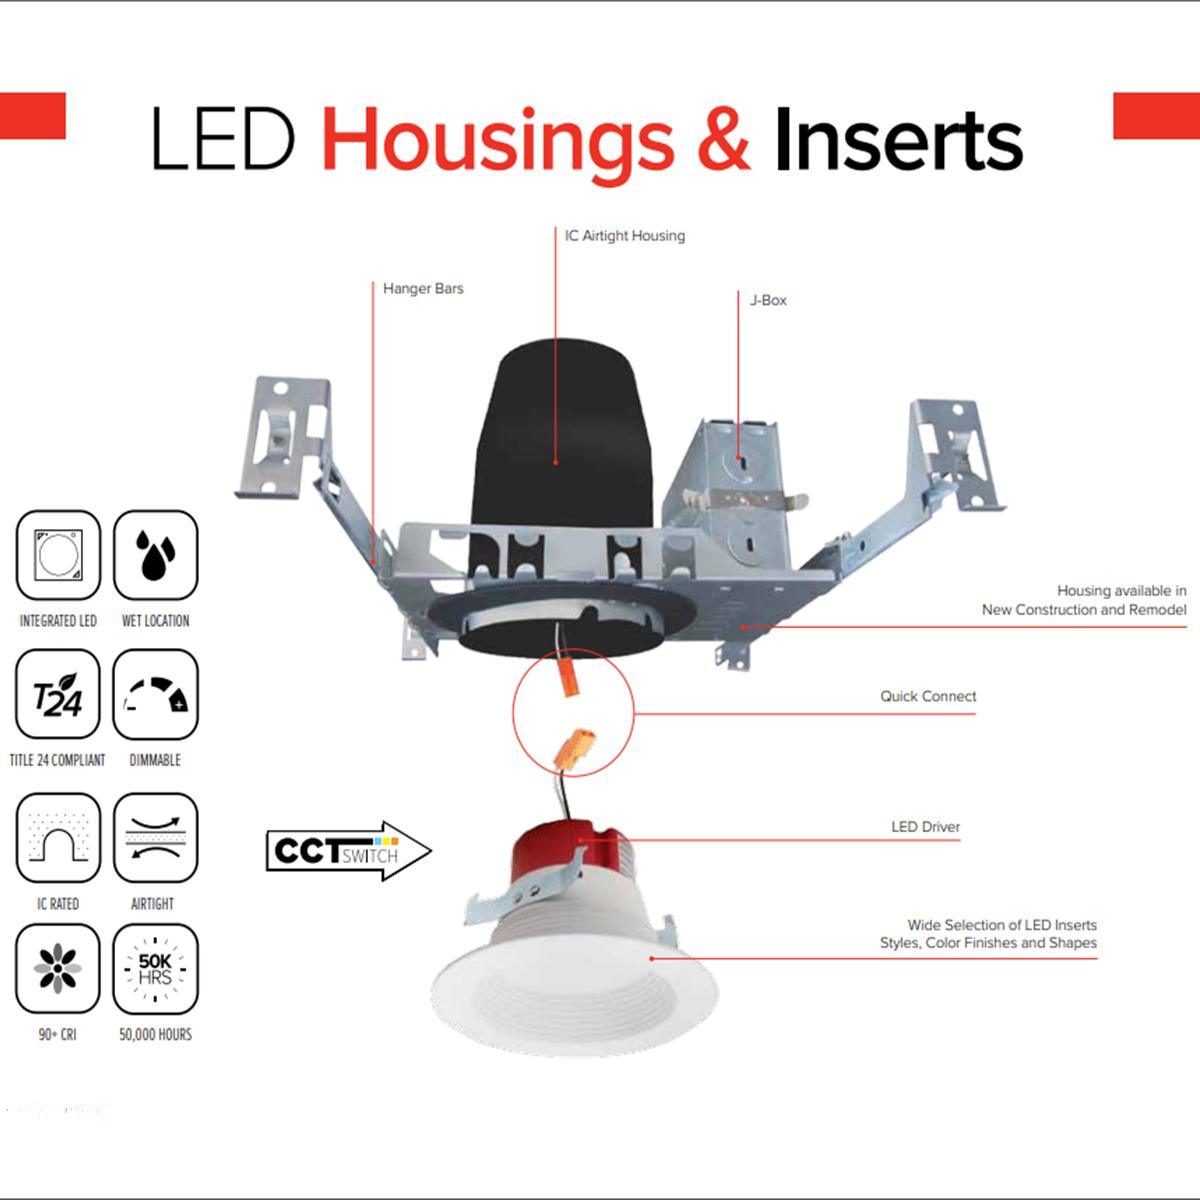 LED New Construction Housing, 4 in, IC Air-Tight, Quick Connect, 277V to 120V Step-Down Transformer - Bees Lighting